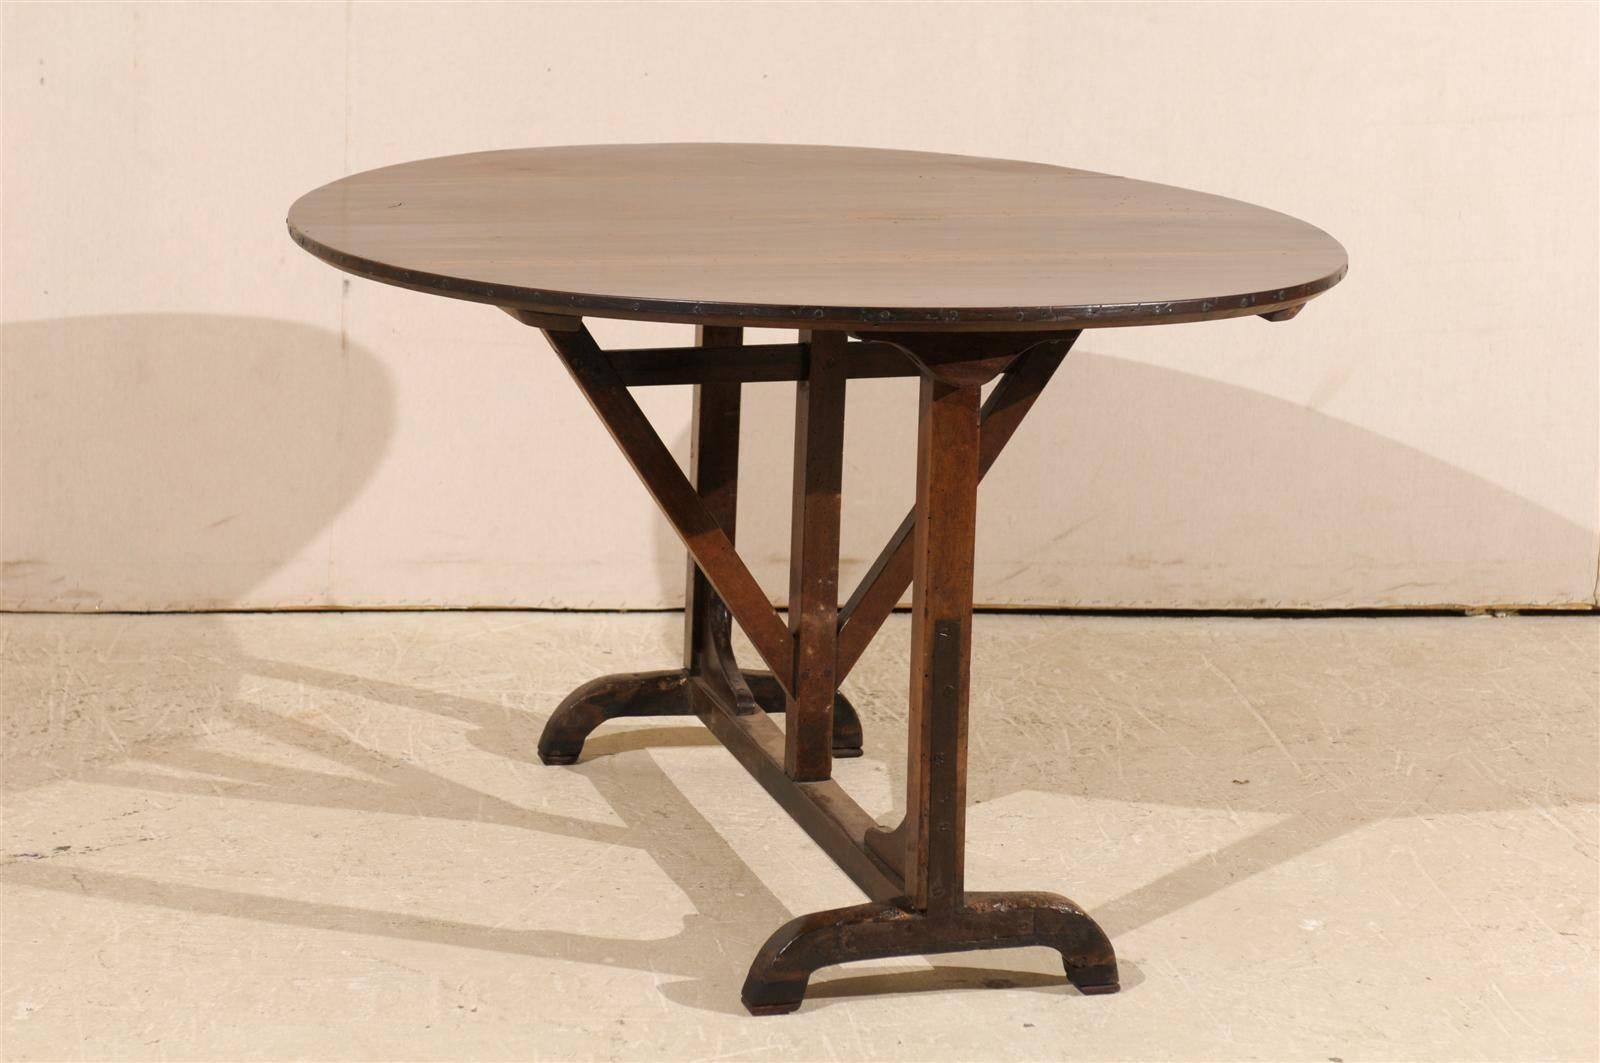 Patinated French Wine Tasting Table of Solid Walnut Wood, Beautiful Wood Grain and Patina